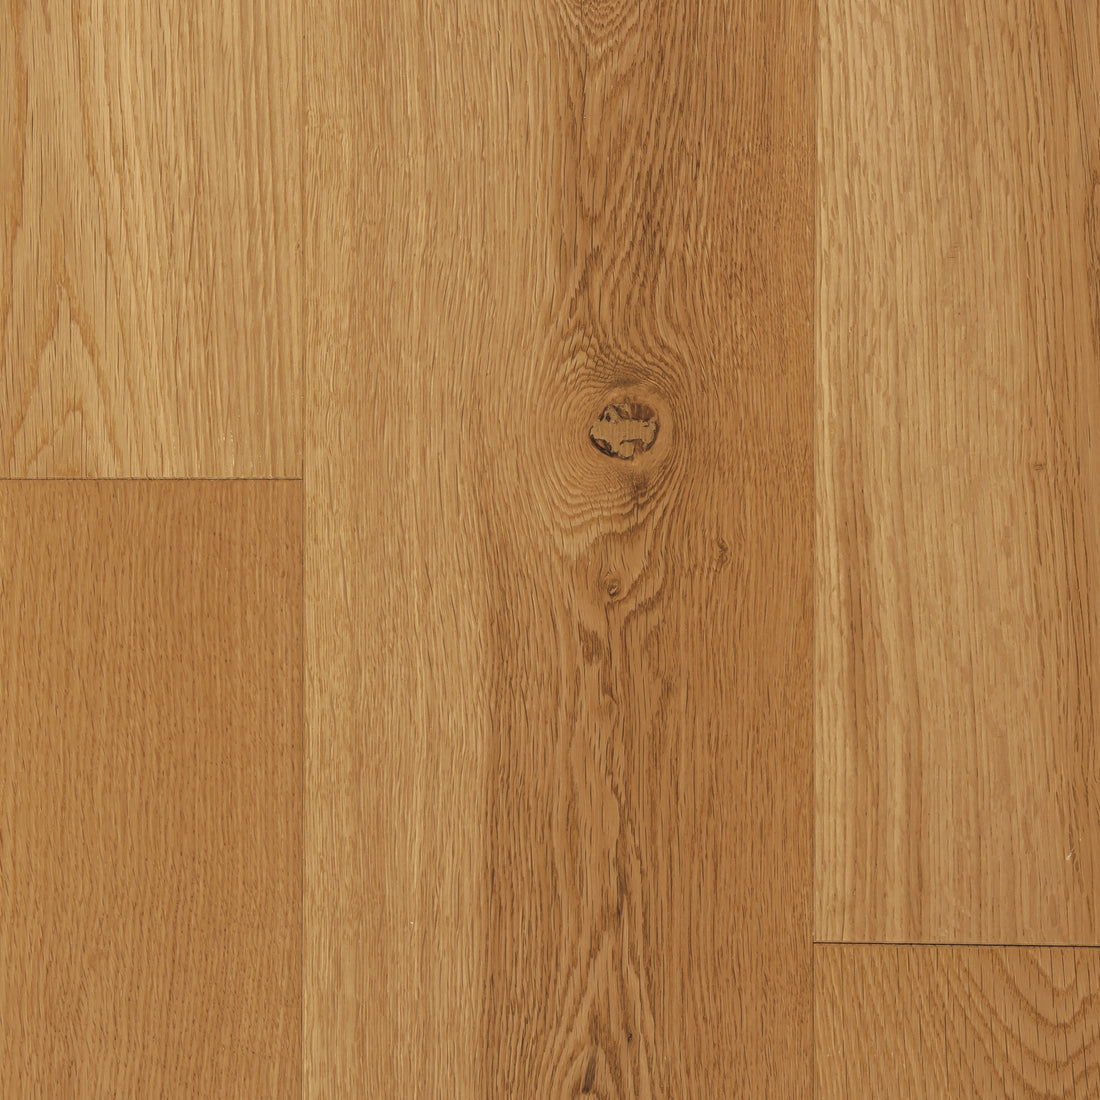 Tuscan Multiply Rustic Oak Brushed UV Oiled 150mm TF23